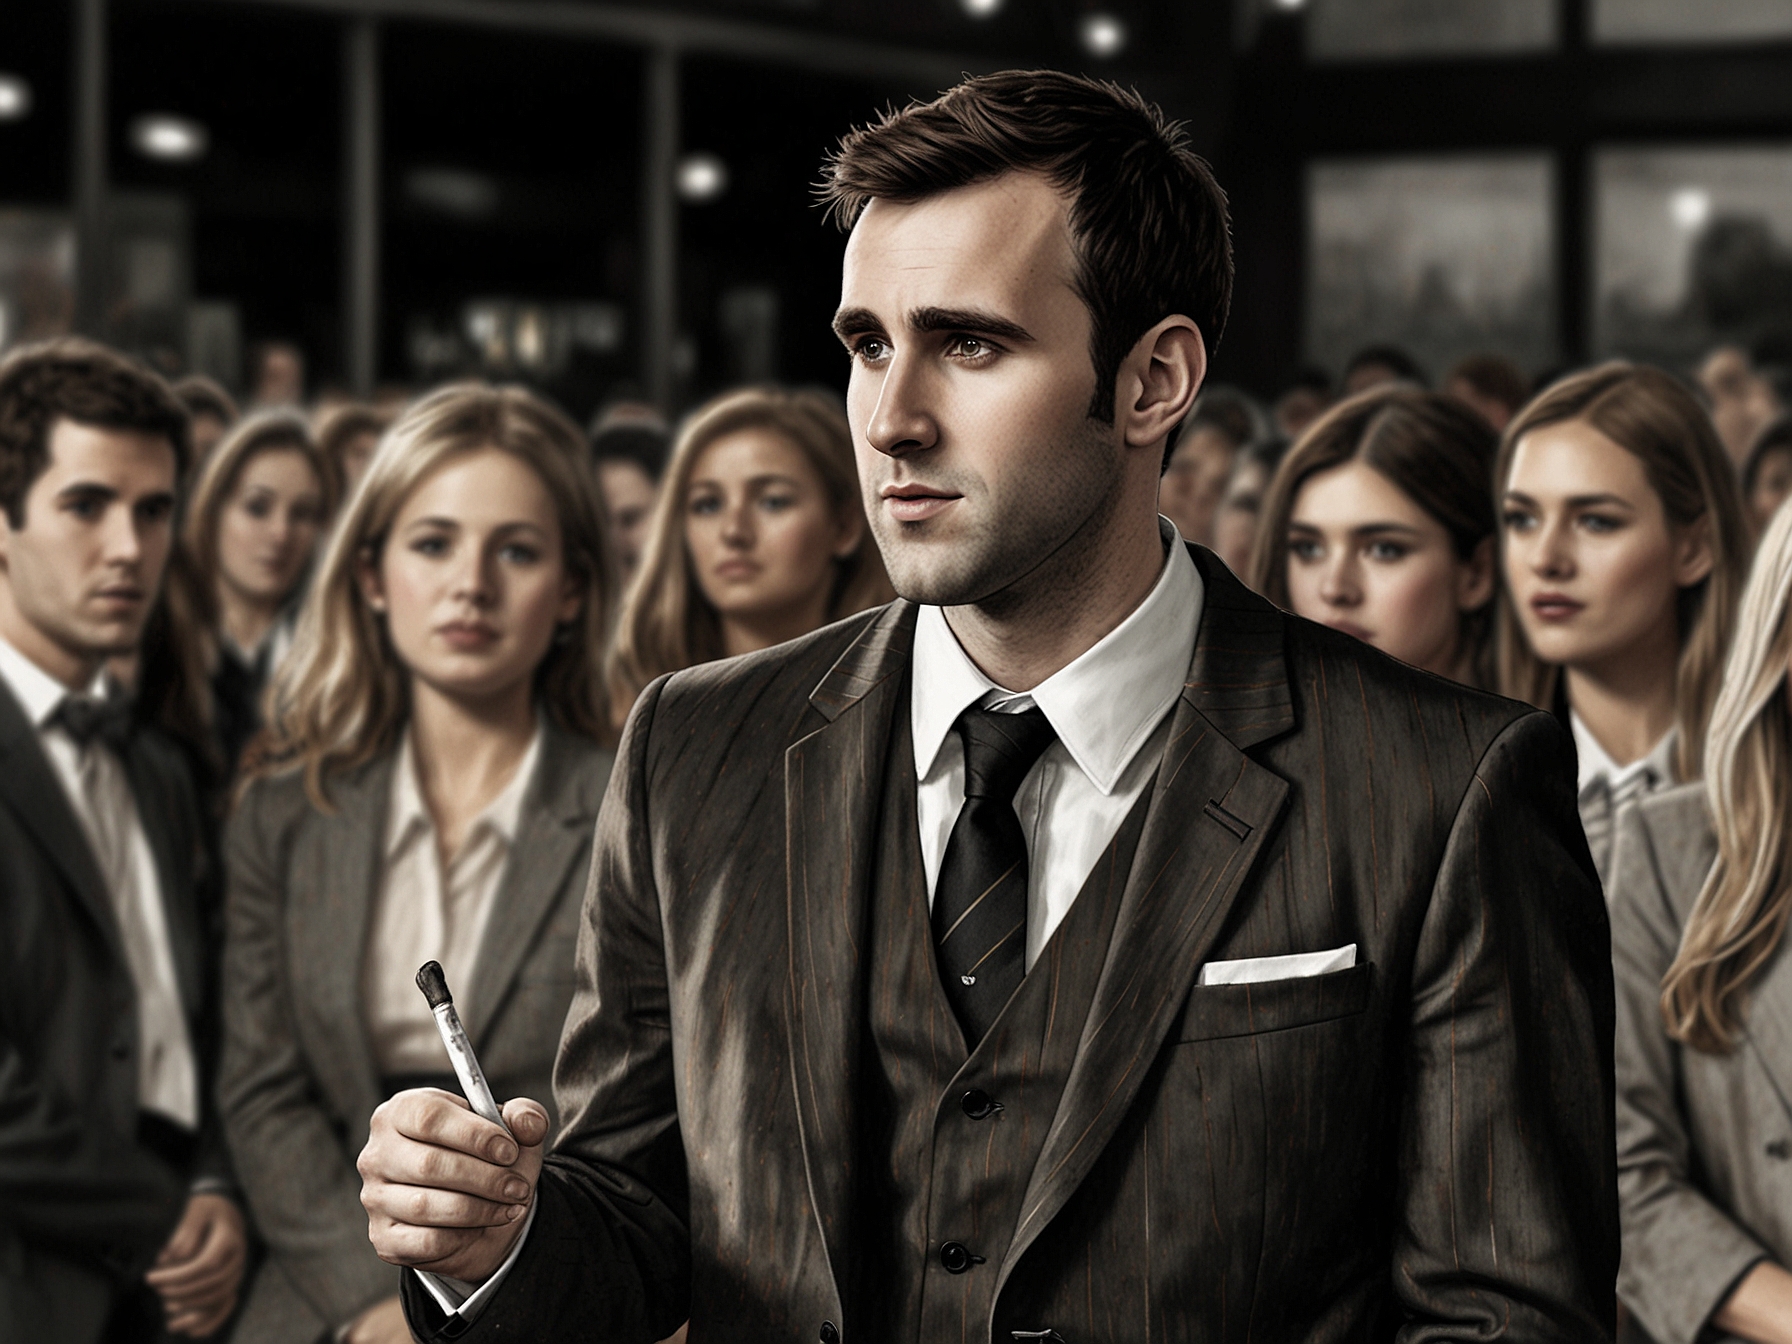 Matthew Lewis, reflecting on his iconic role as Neville Longbottom at a movie premiere, dressed in a formal suit, interacting with media and fans.